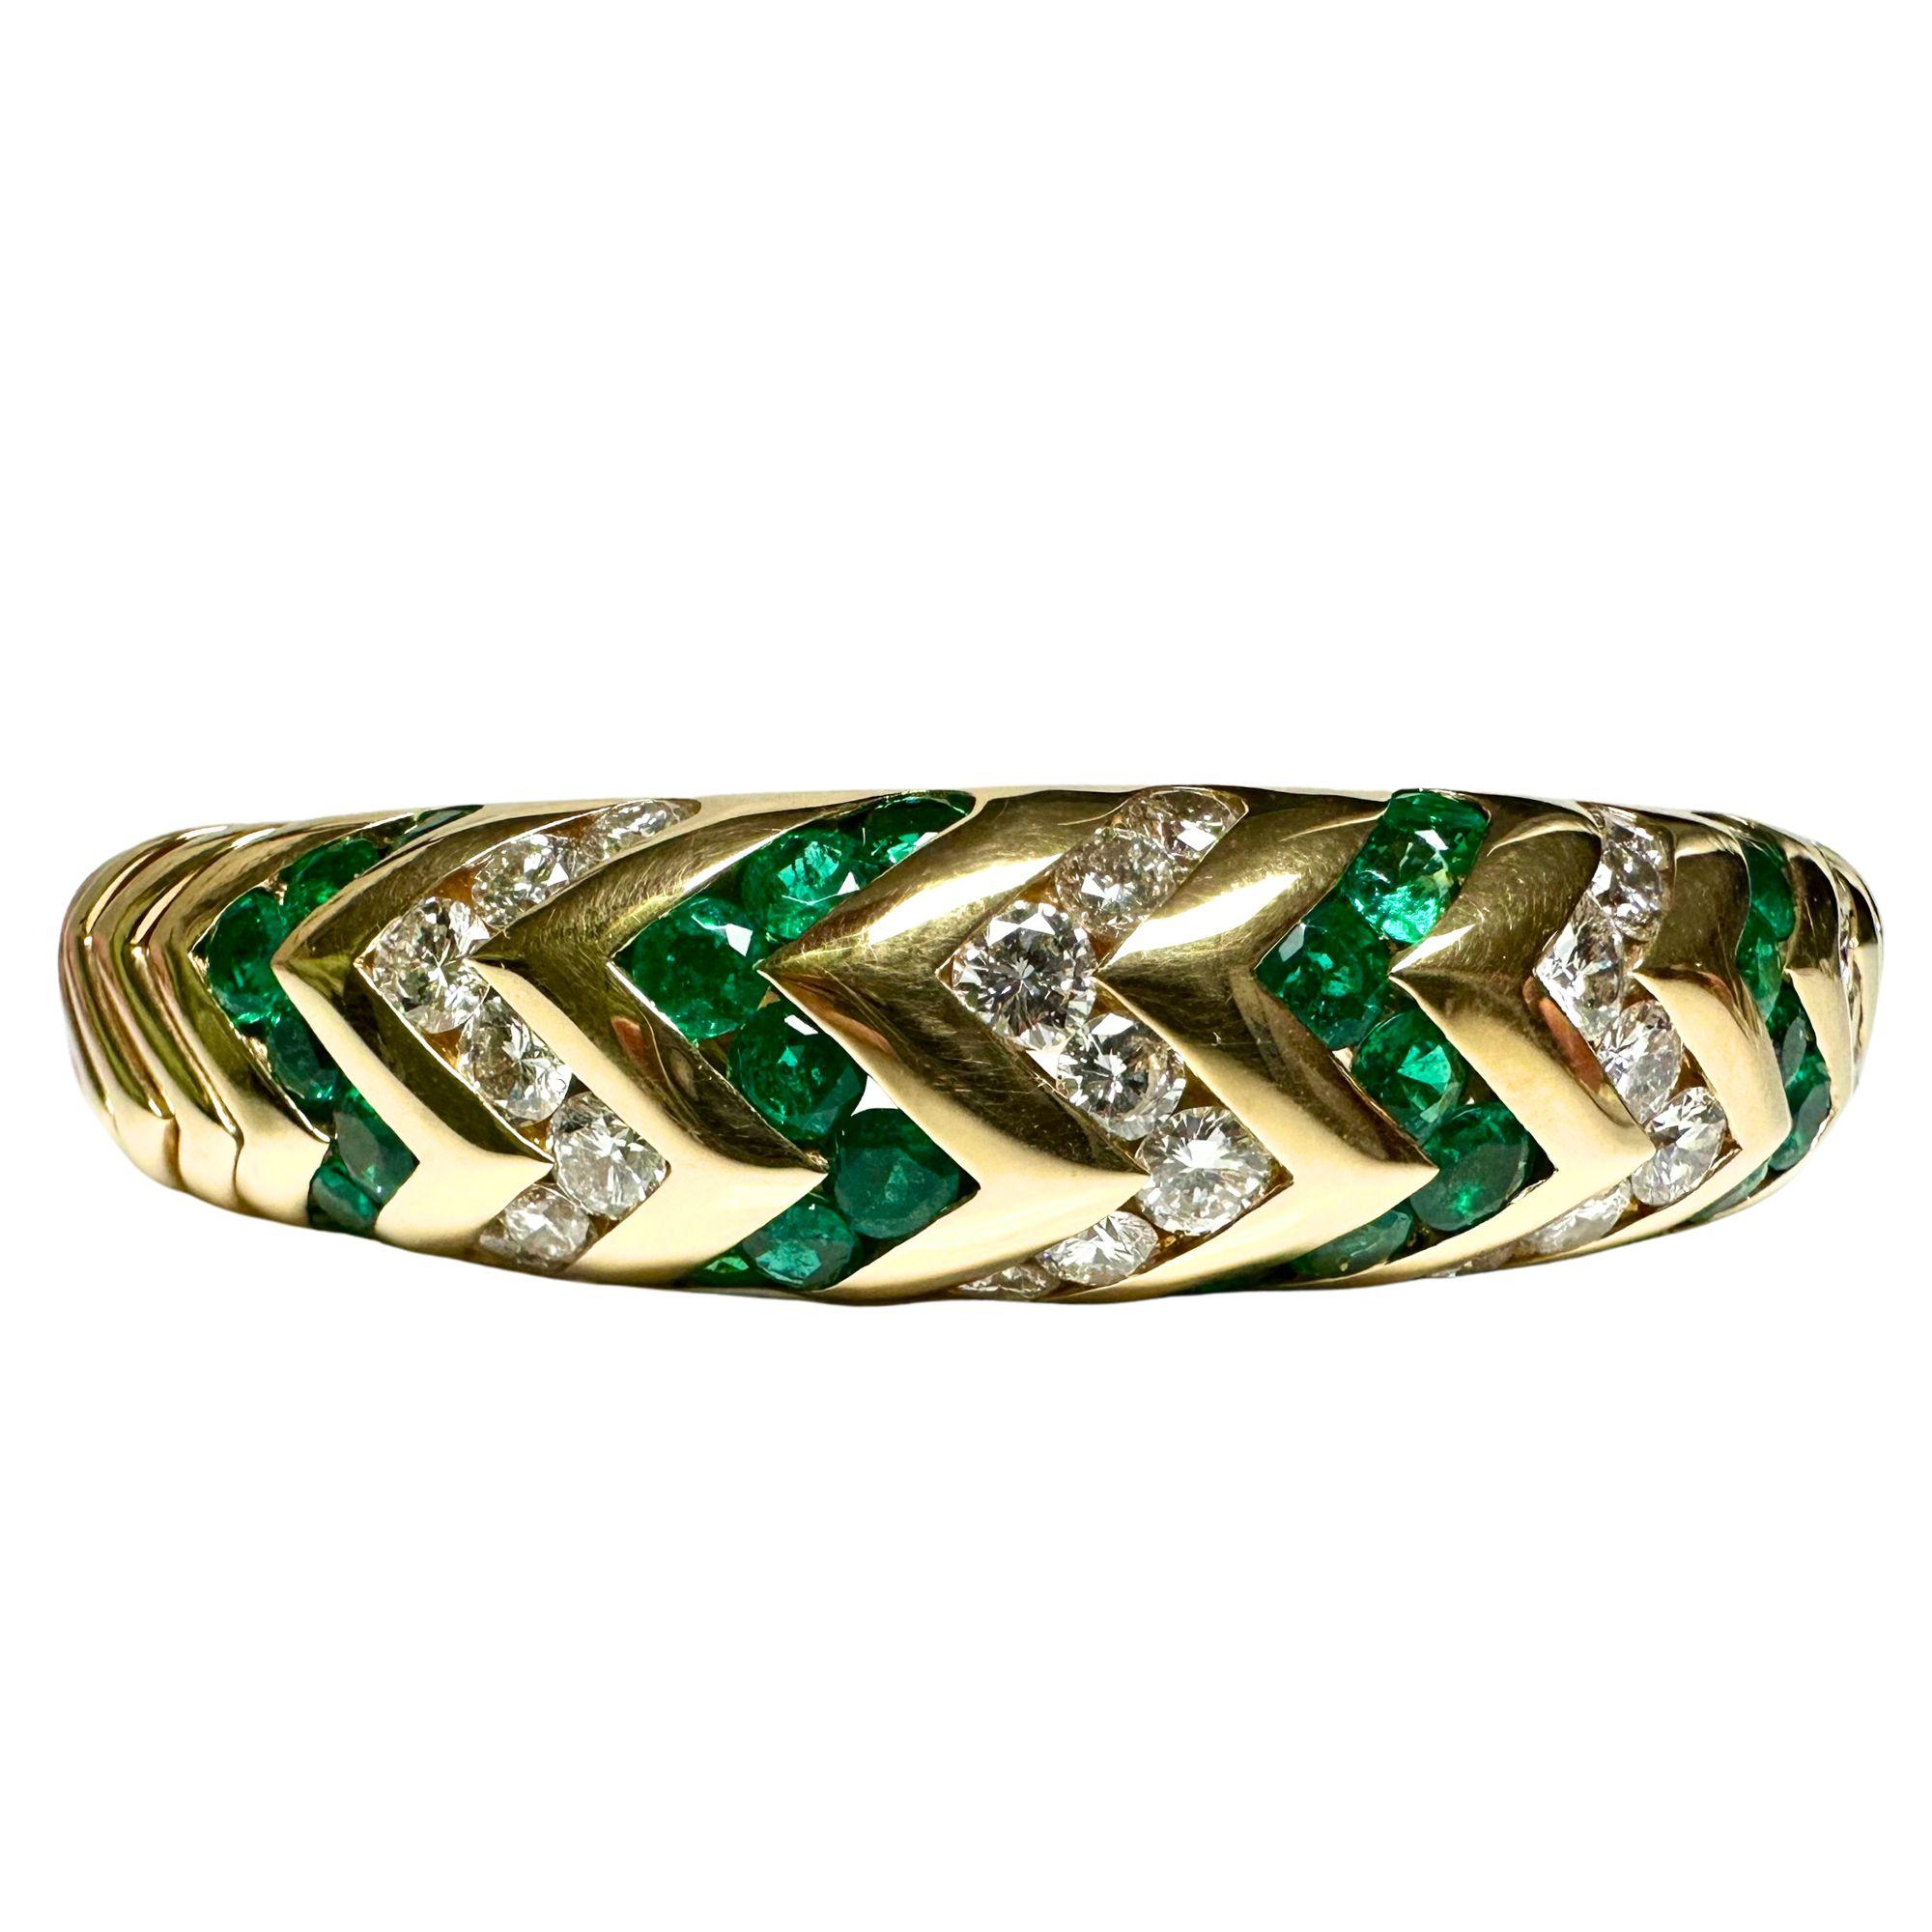 A collectible 18k yellow gold expandable cuff highlighted by about 5 carats each of vivid emeralds and bright diamonds made in the early 1970’s. The diamonds are round brilliant-cut and the emeralds are ovals. The yellow gold is sculptured to appear